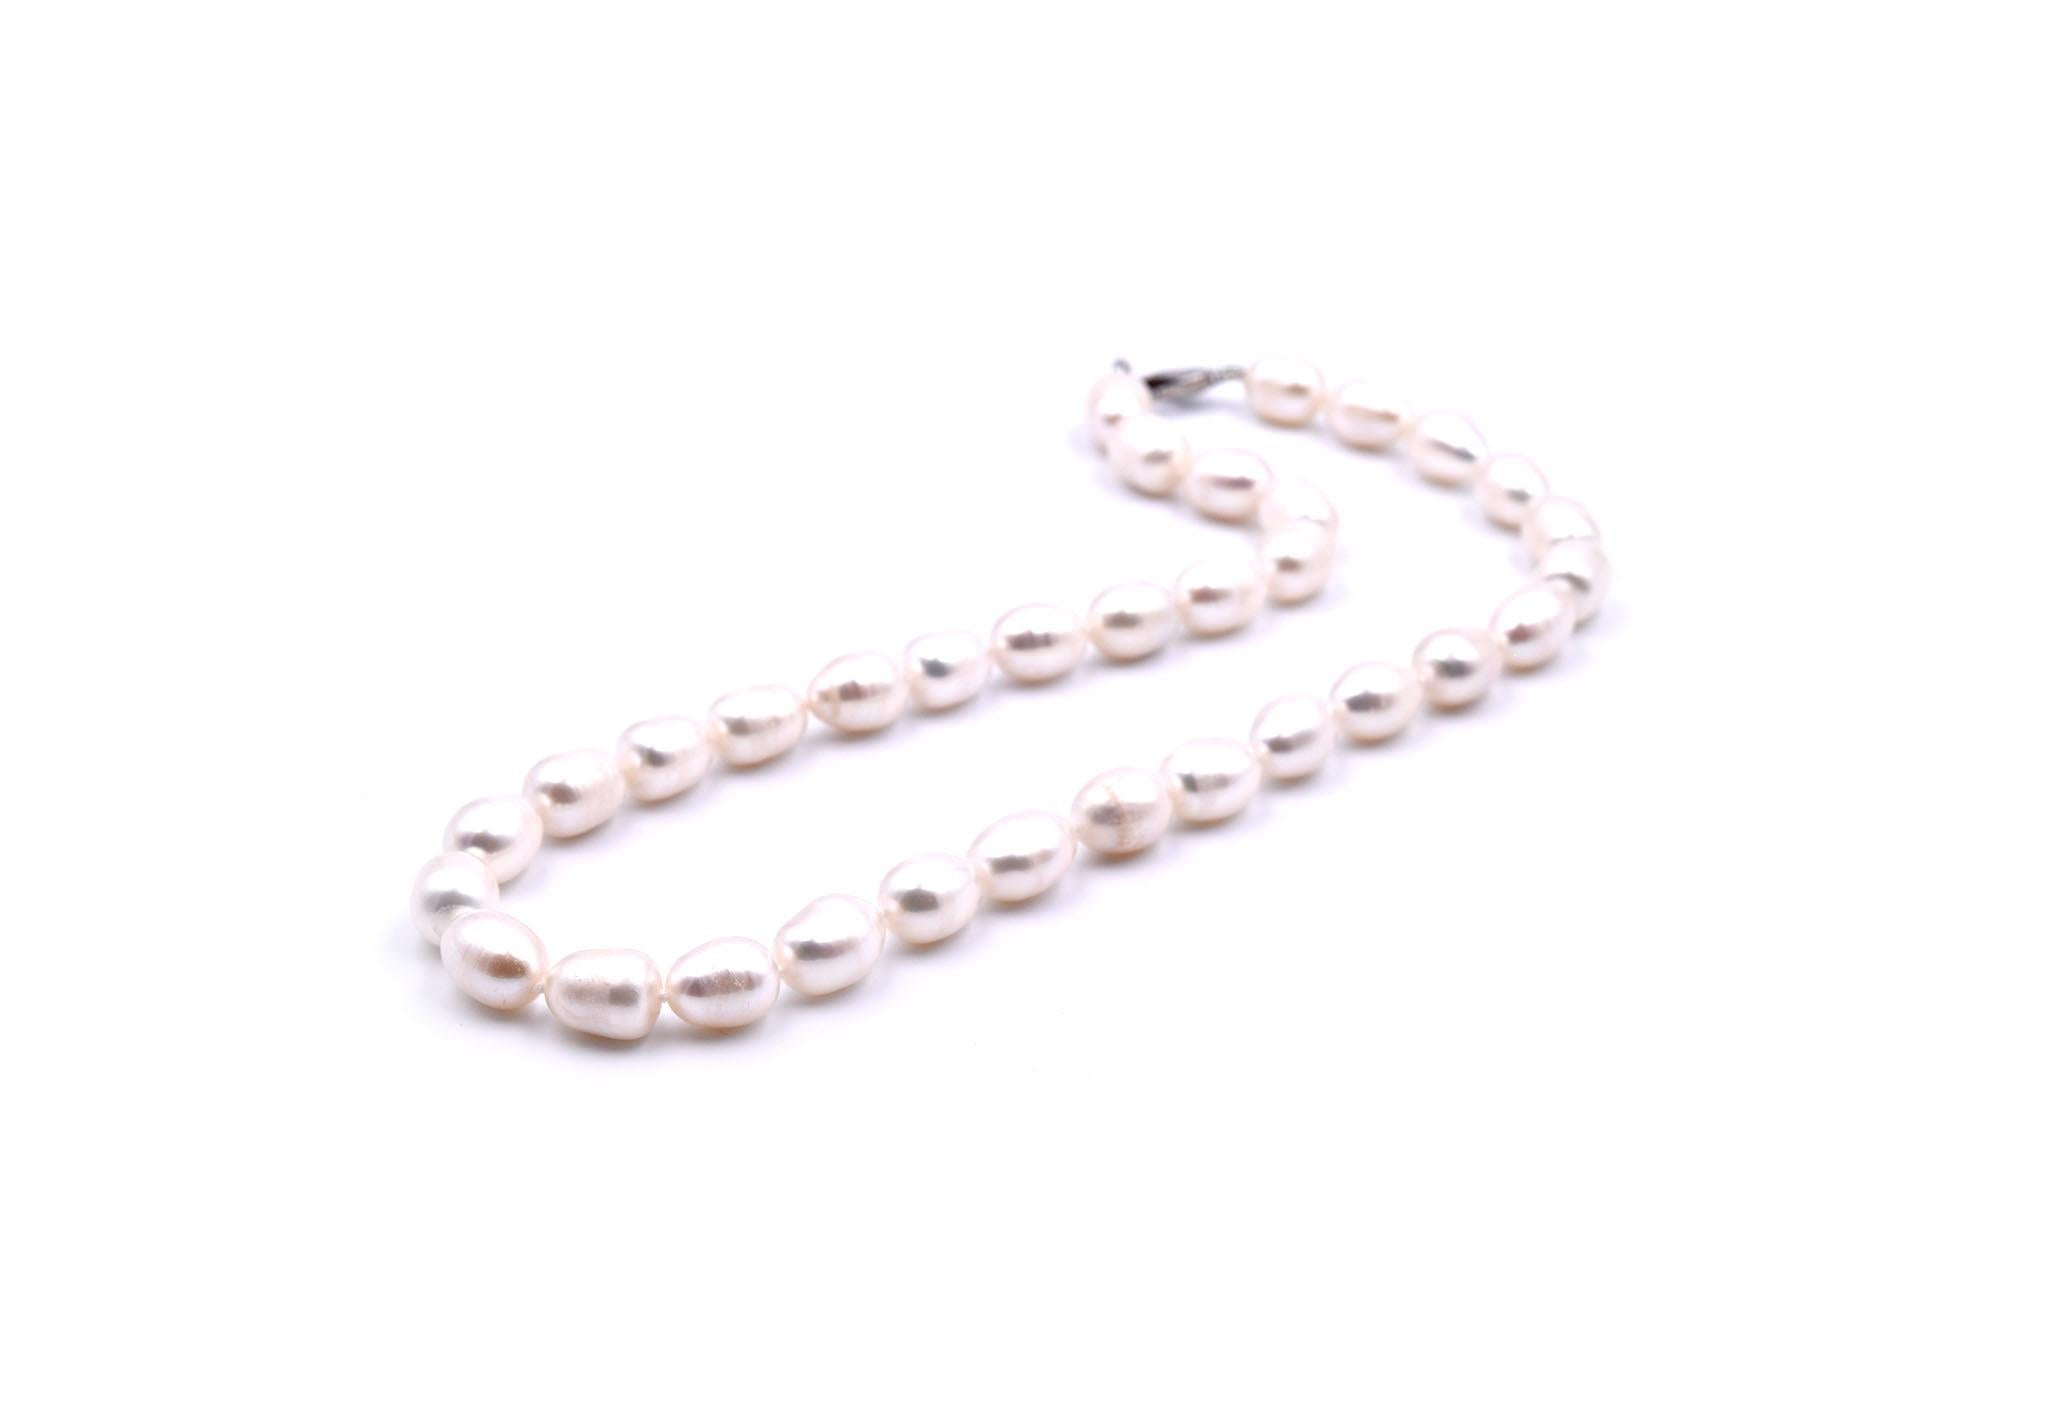 Designer: custom design
Material: 14k white gold
Banded Pearls: 11.25mm 
Dimensions: necklace is 18 ½ -inch long
Weight: 58.37 grams
